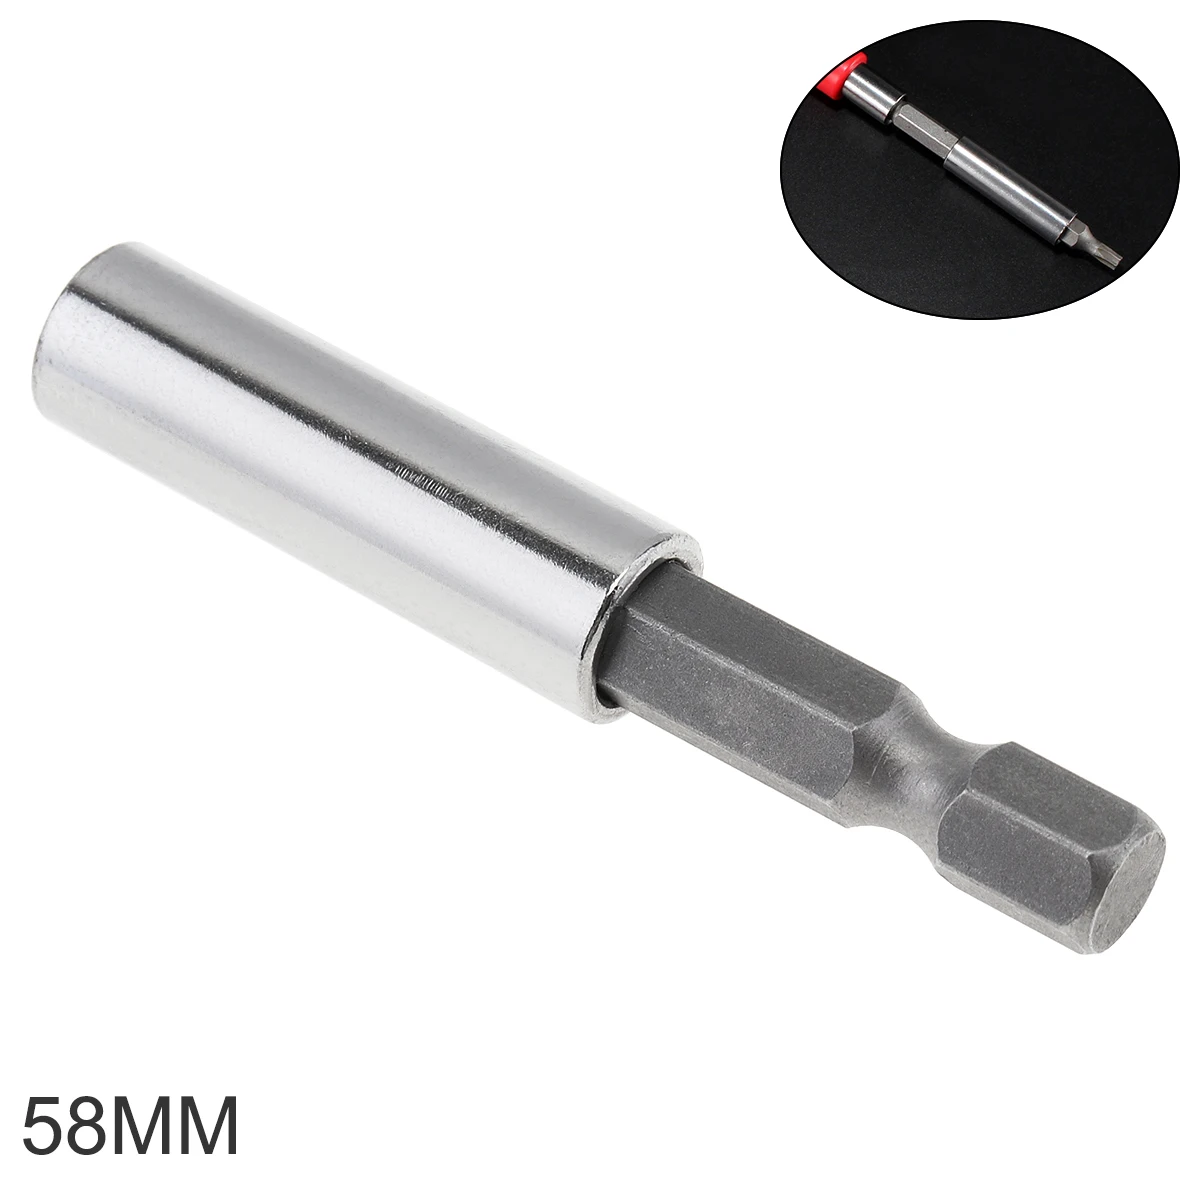 

58mm Hex Shank Screwdriver Bit Extention Rod with Magnetic Extension Positioning Rod Socket Extension